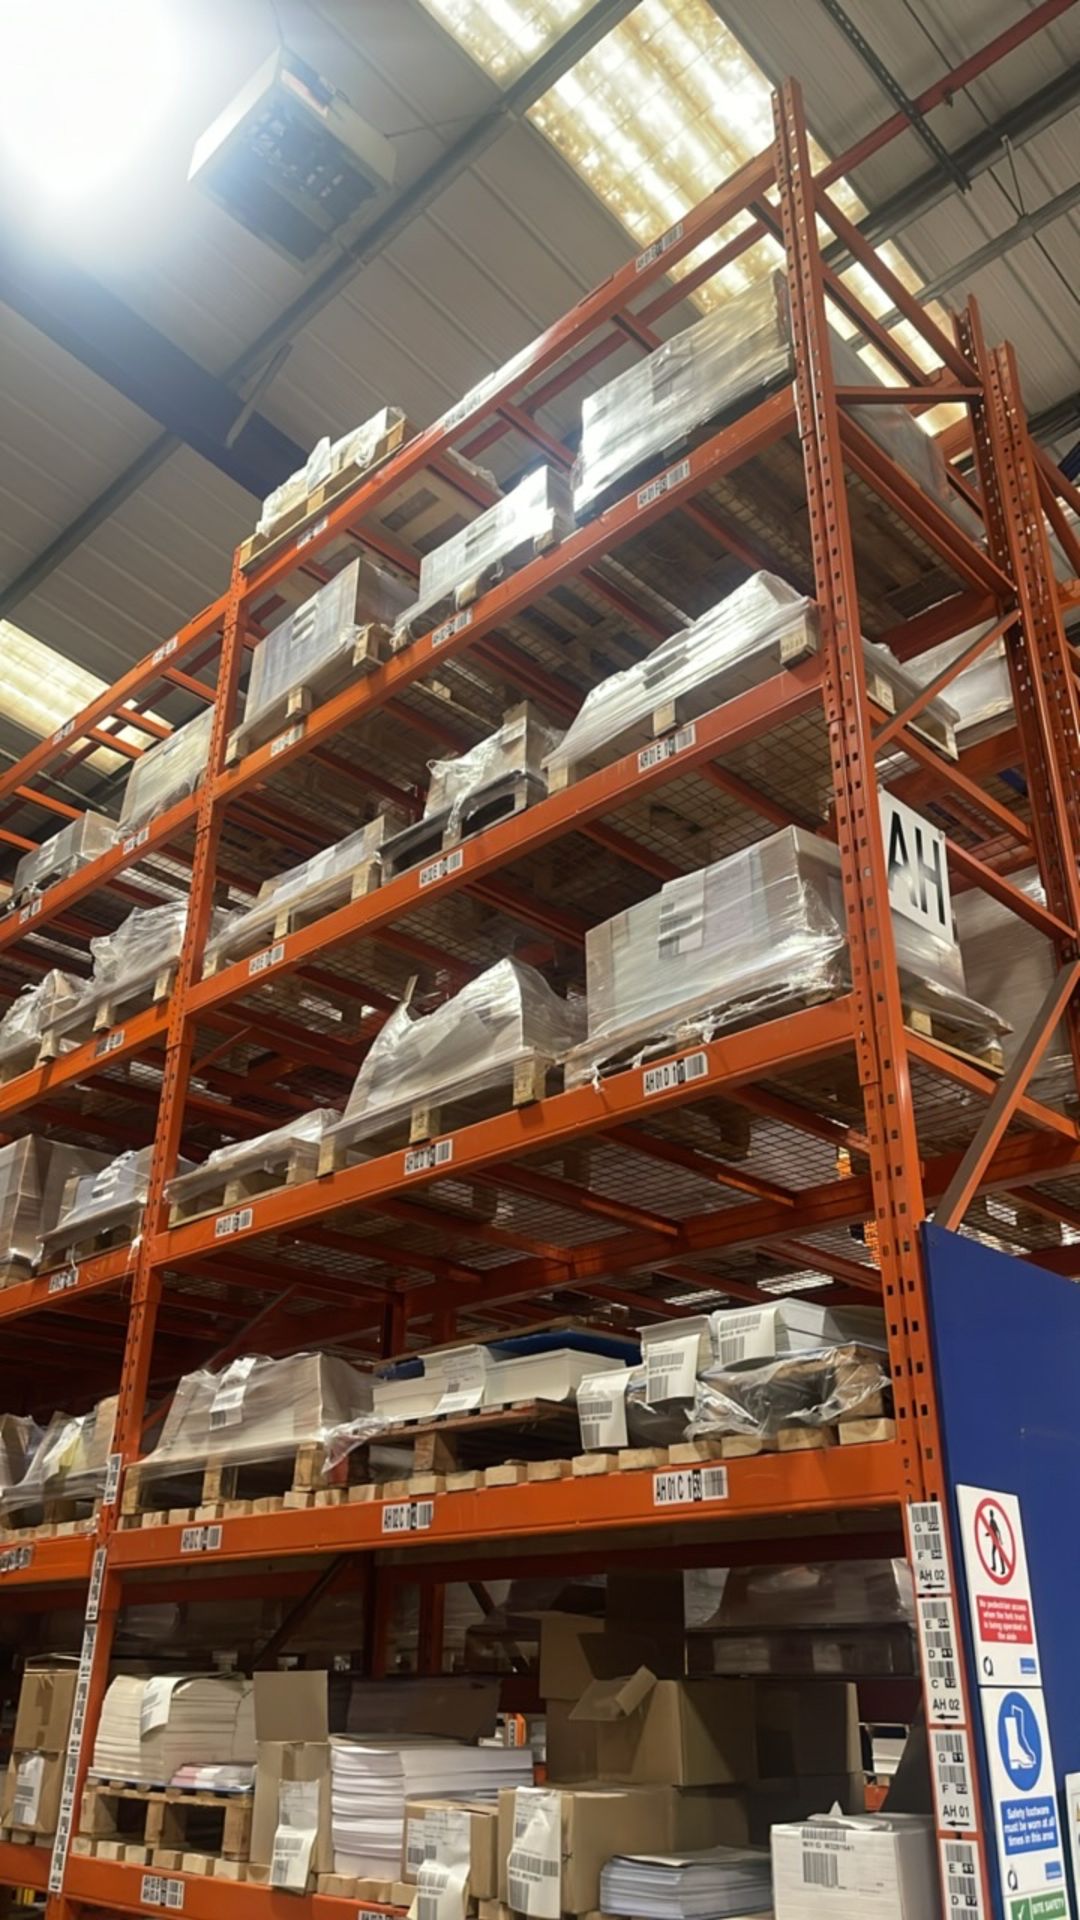 ref 2 - 24 Bays Of Boltless Pallet Racking - Image 5 of 9